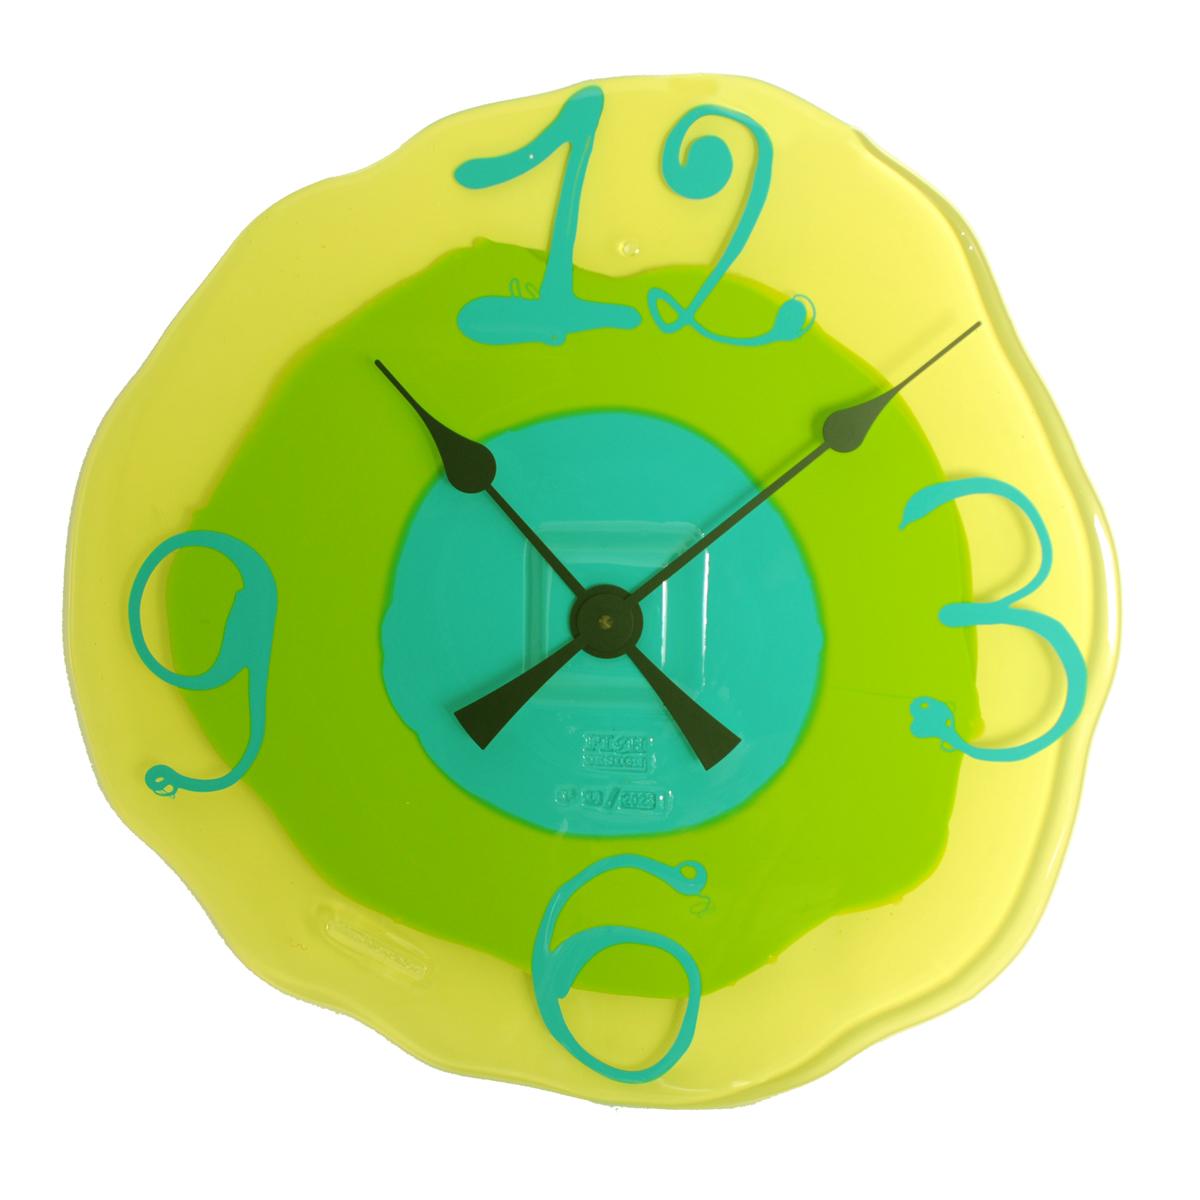 Contemporary Watch Me Clock Large Clear Yellow Matt Lime Matt Turquoise by Gaetano Pesce For Sale